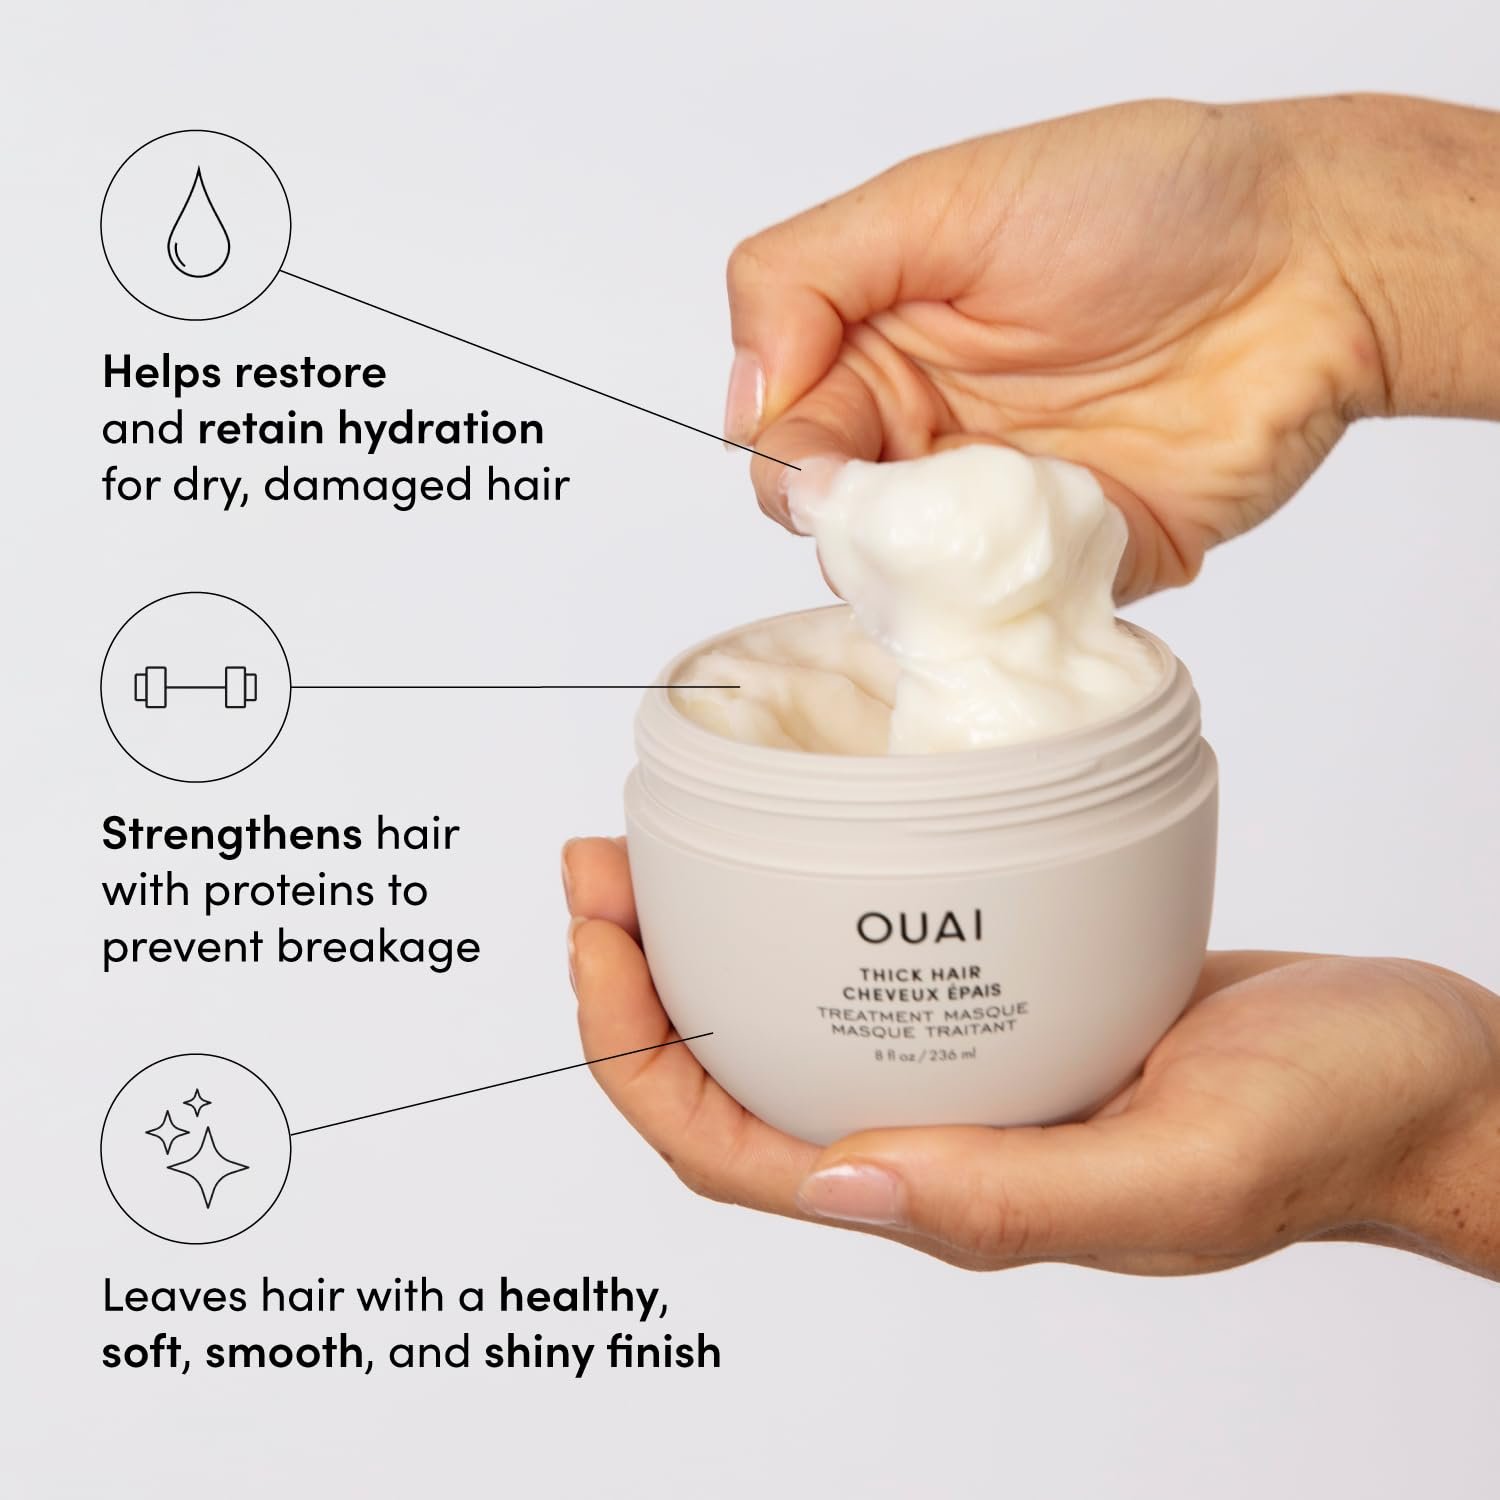 OUAI Thick Hair Mask - Hair Treatment Masque with Almond Oil, Olive Oil,  Hydrolyzed Keratin to Restore Damaged Hair - Phthalate  Paraben Free Hair Masque (8 fl oz)